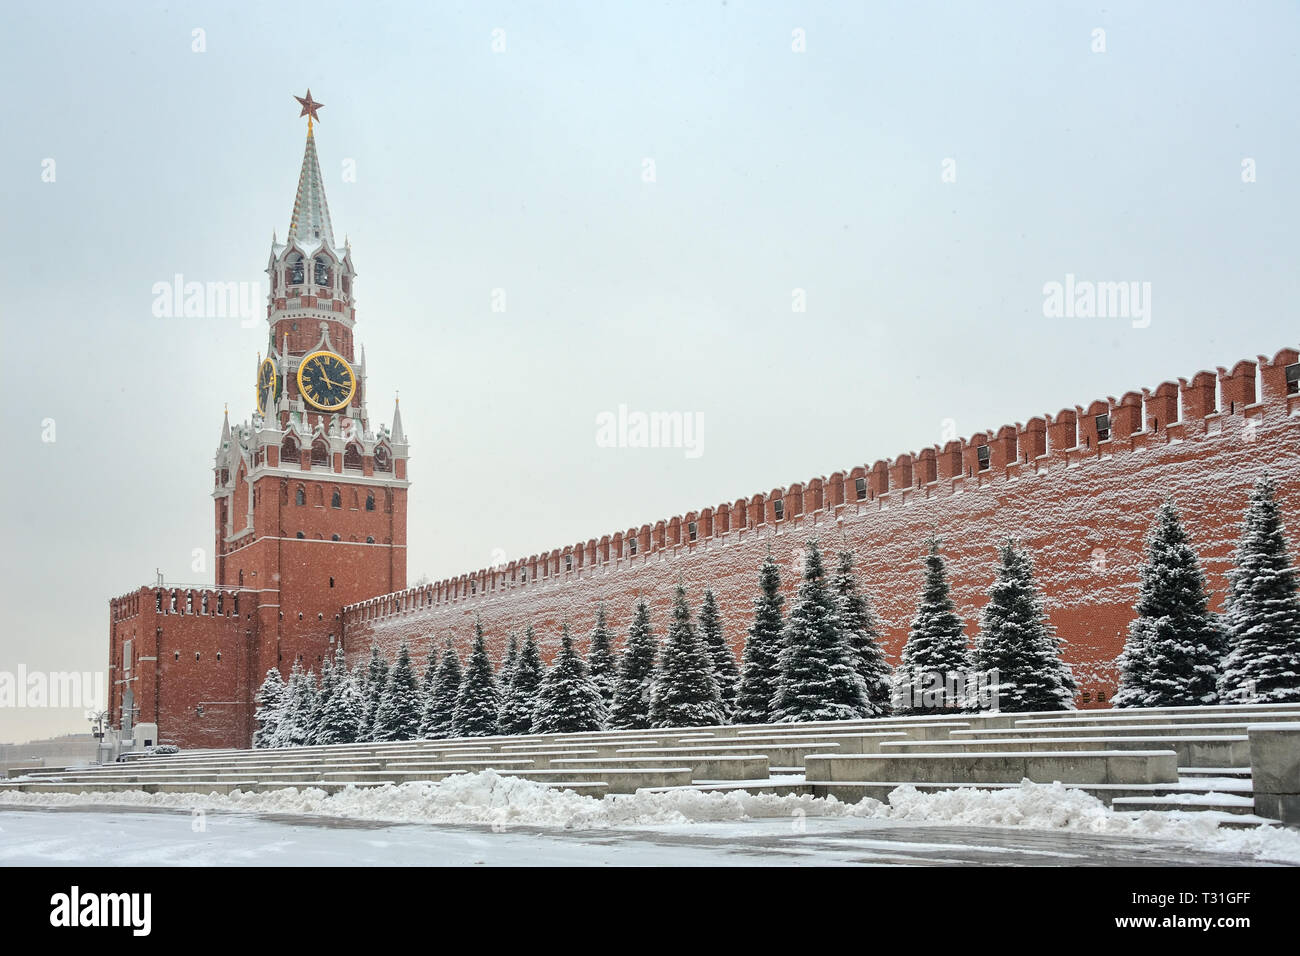 = Spasskaya Tower and Kremlin Wall in Snow =  View from Red Square on Spasskaya Tower (Savior’s Tower) and a line of blue spruce (Picea pungens) along Stock Photo